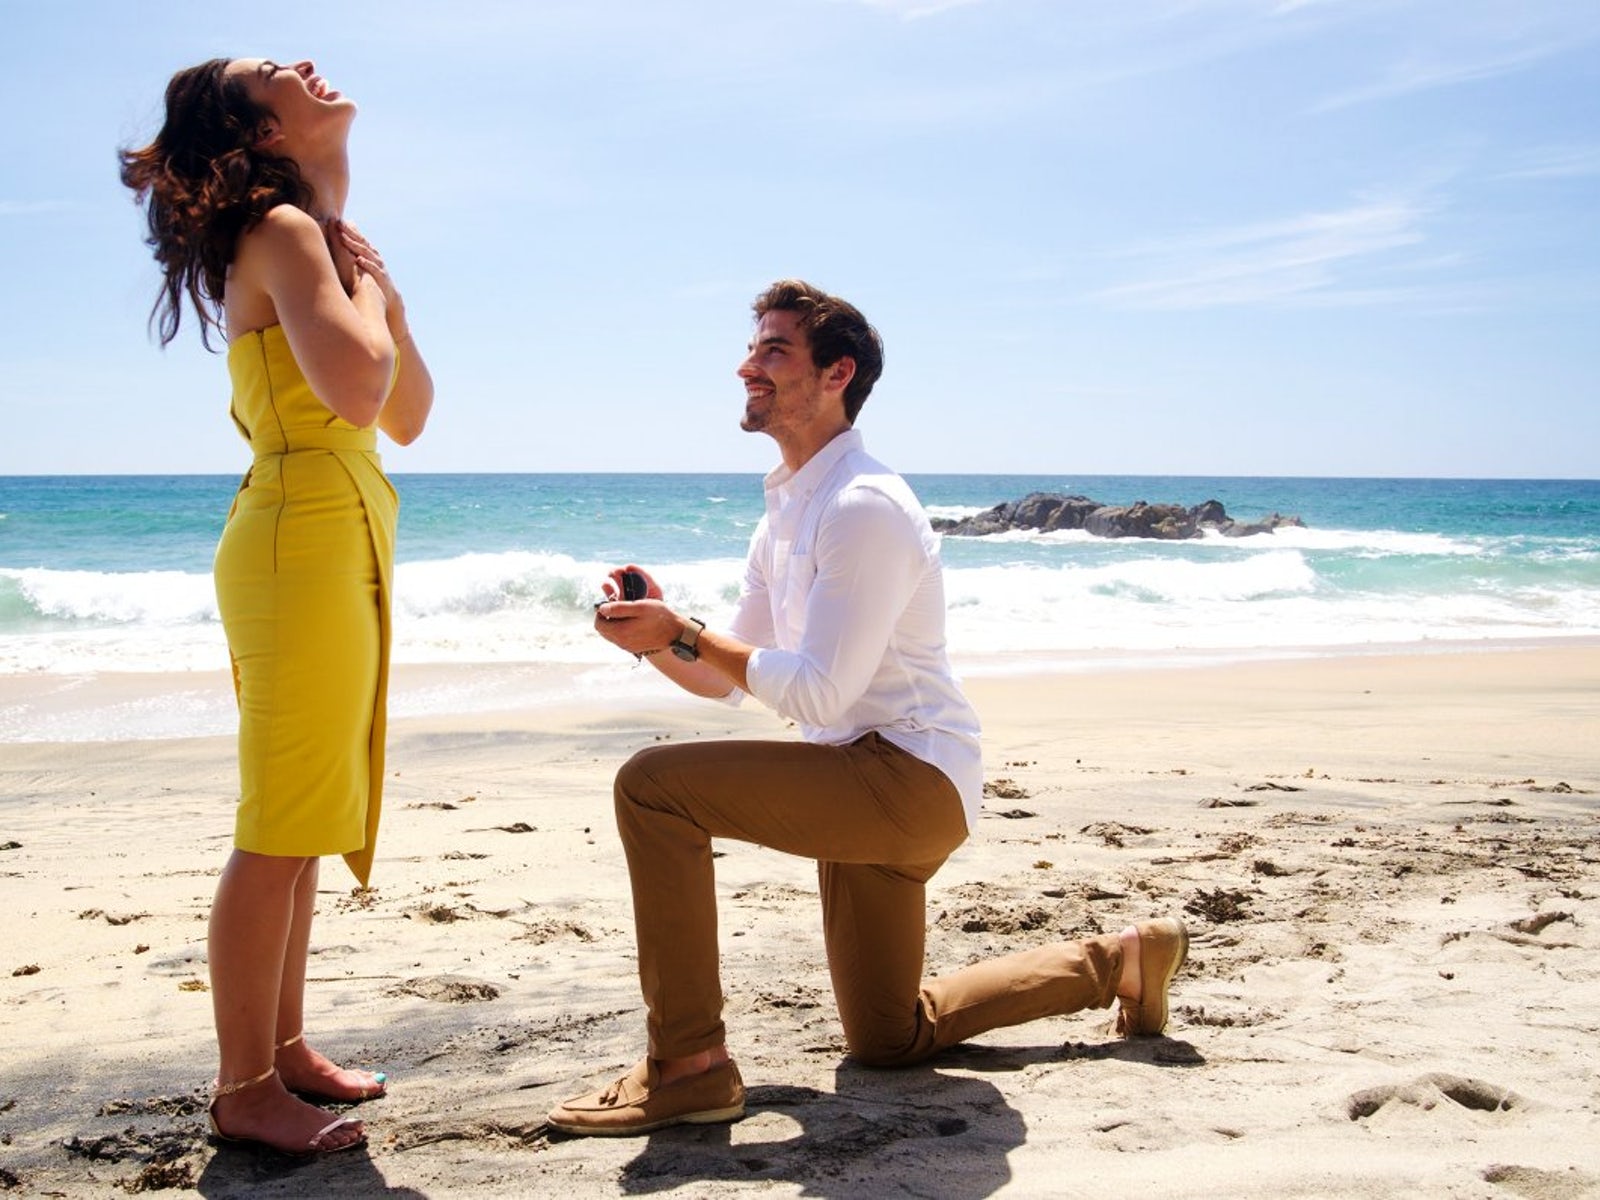 'Bachelor in Paradise' Season 6 renewal formally announced by ABC